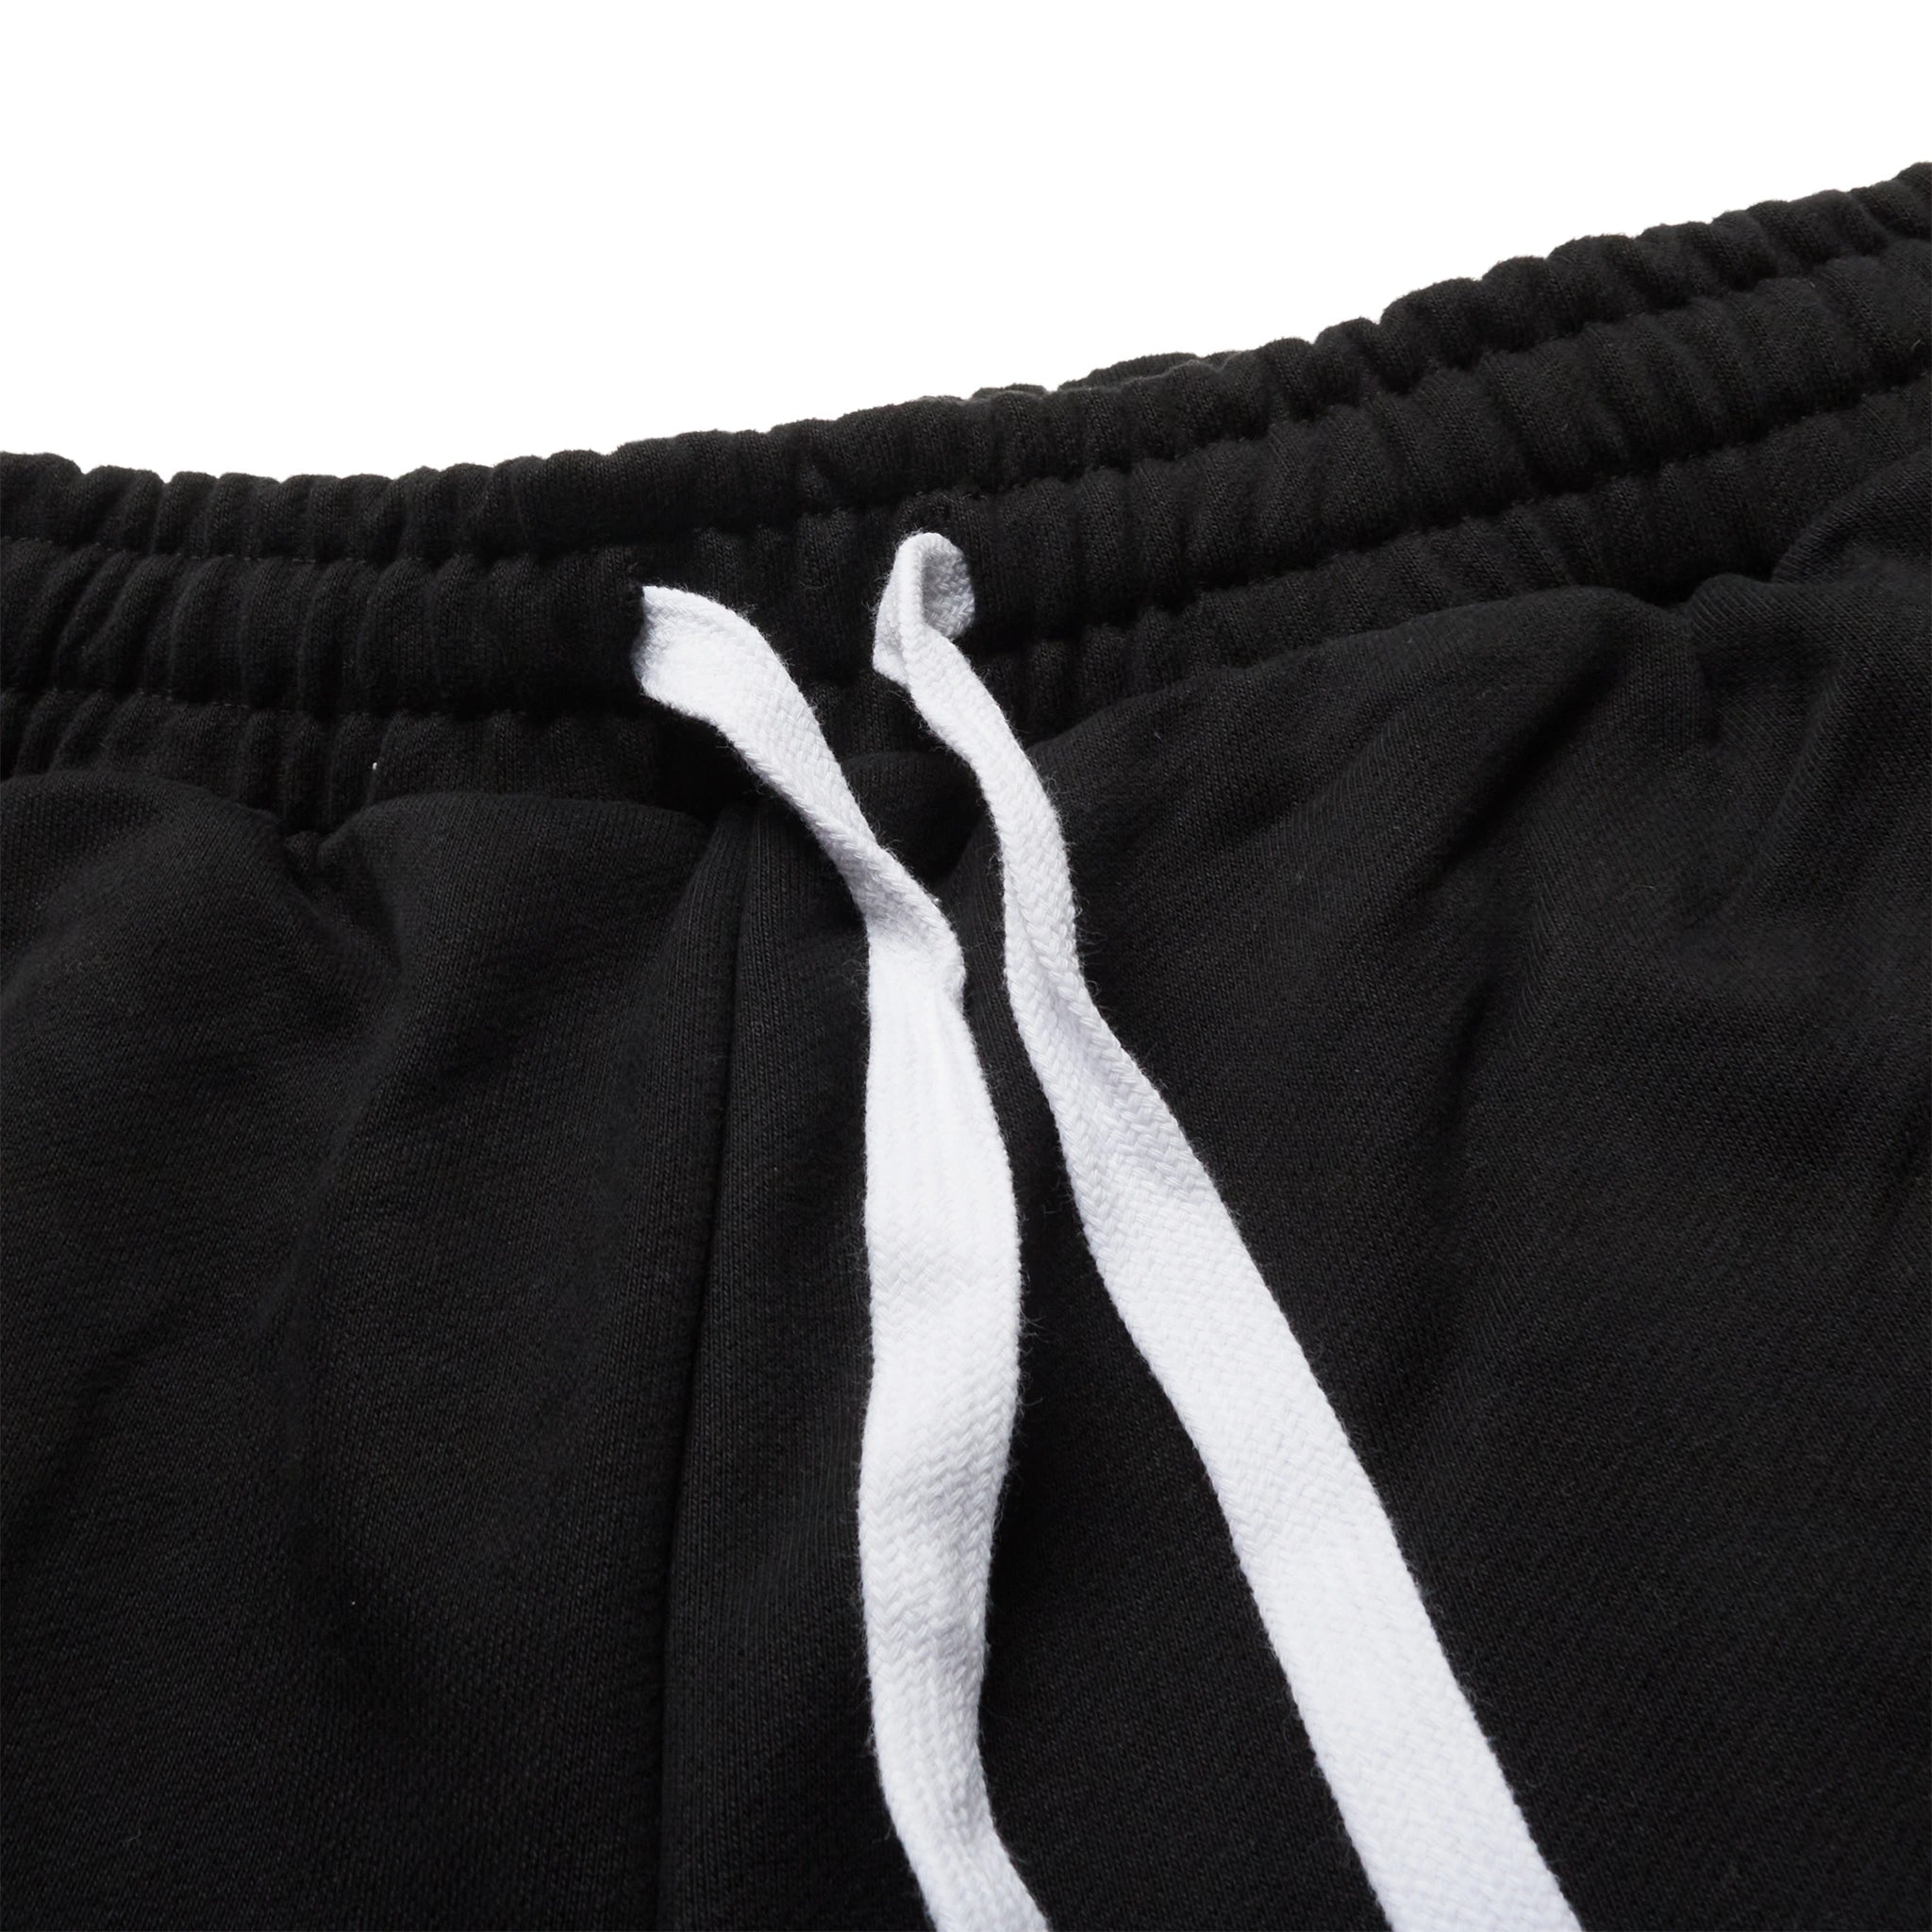 Strings view of Carsicko London Black Track Pants